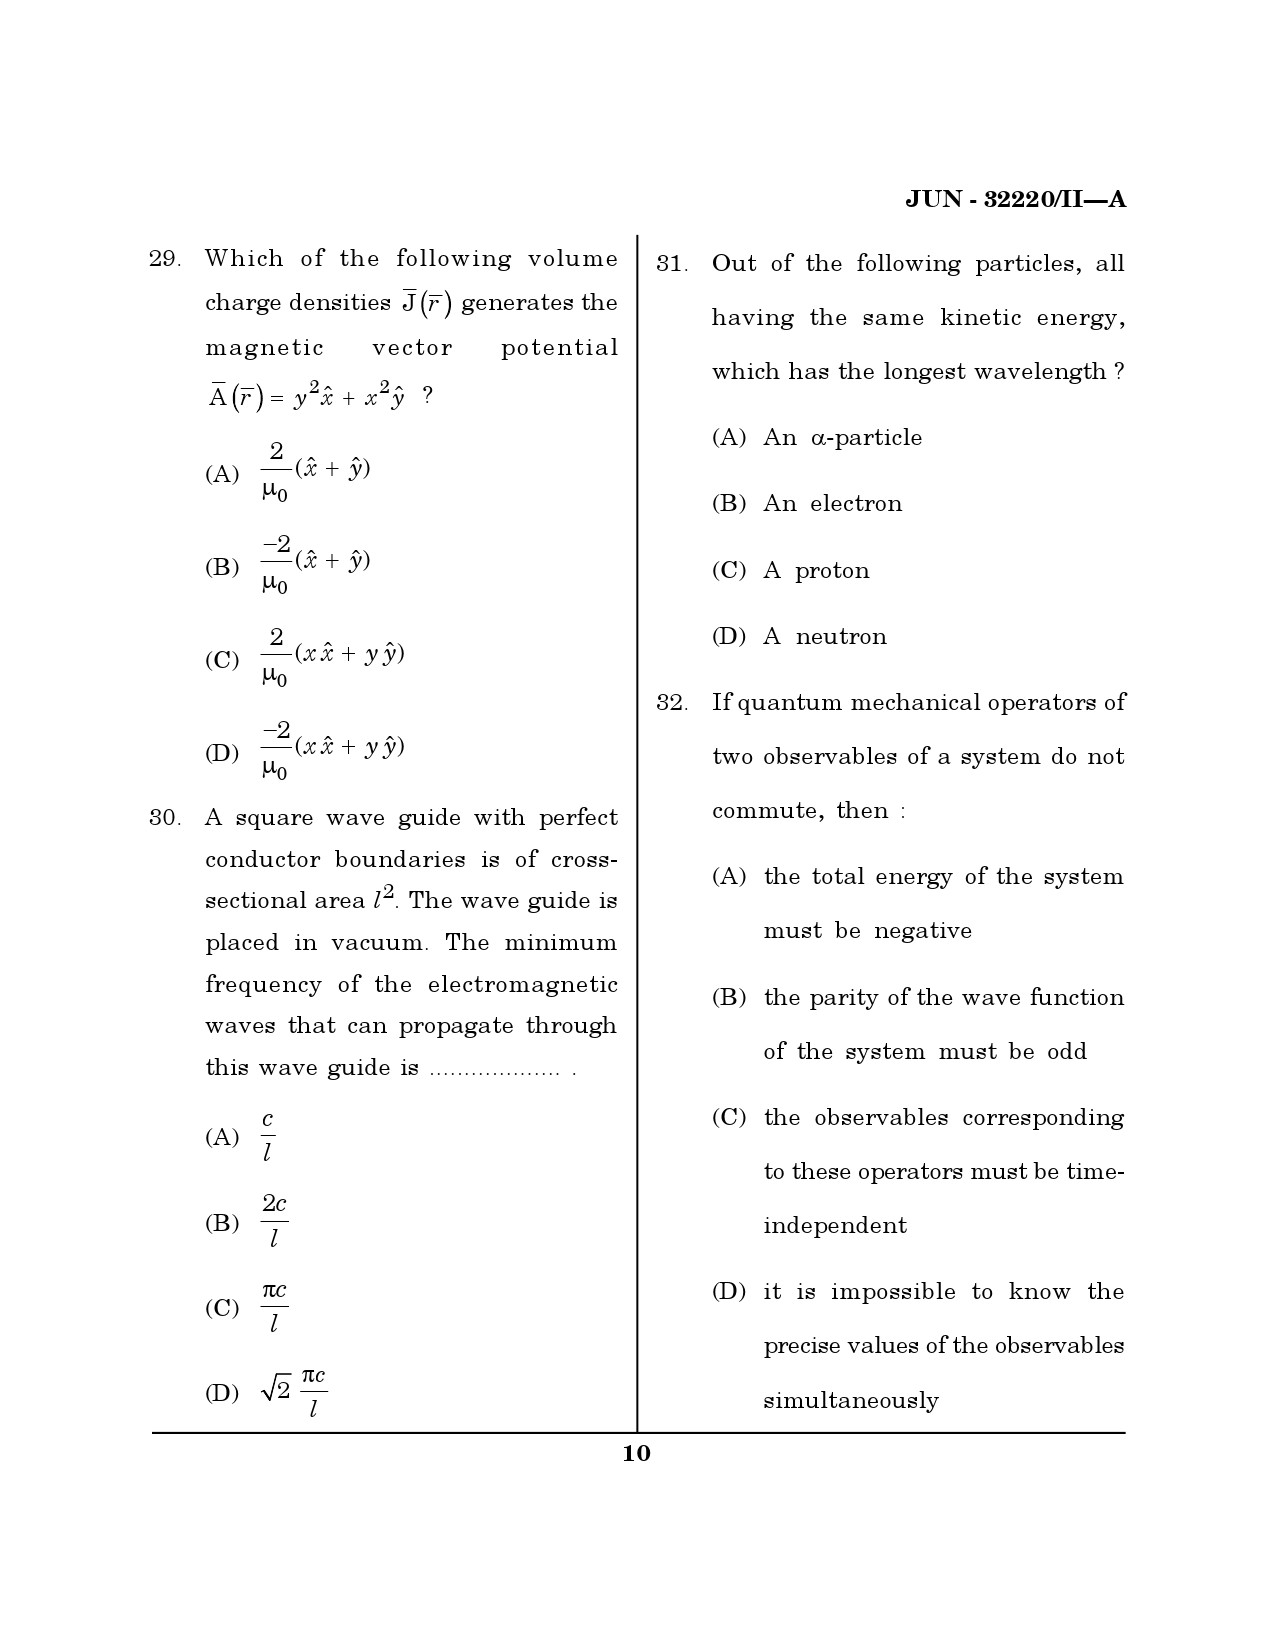 Maharashtra SET Physical Science Question Paper II June 2020 9